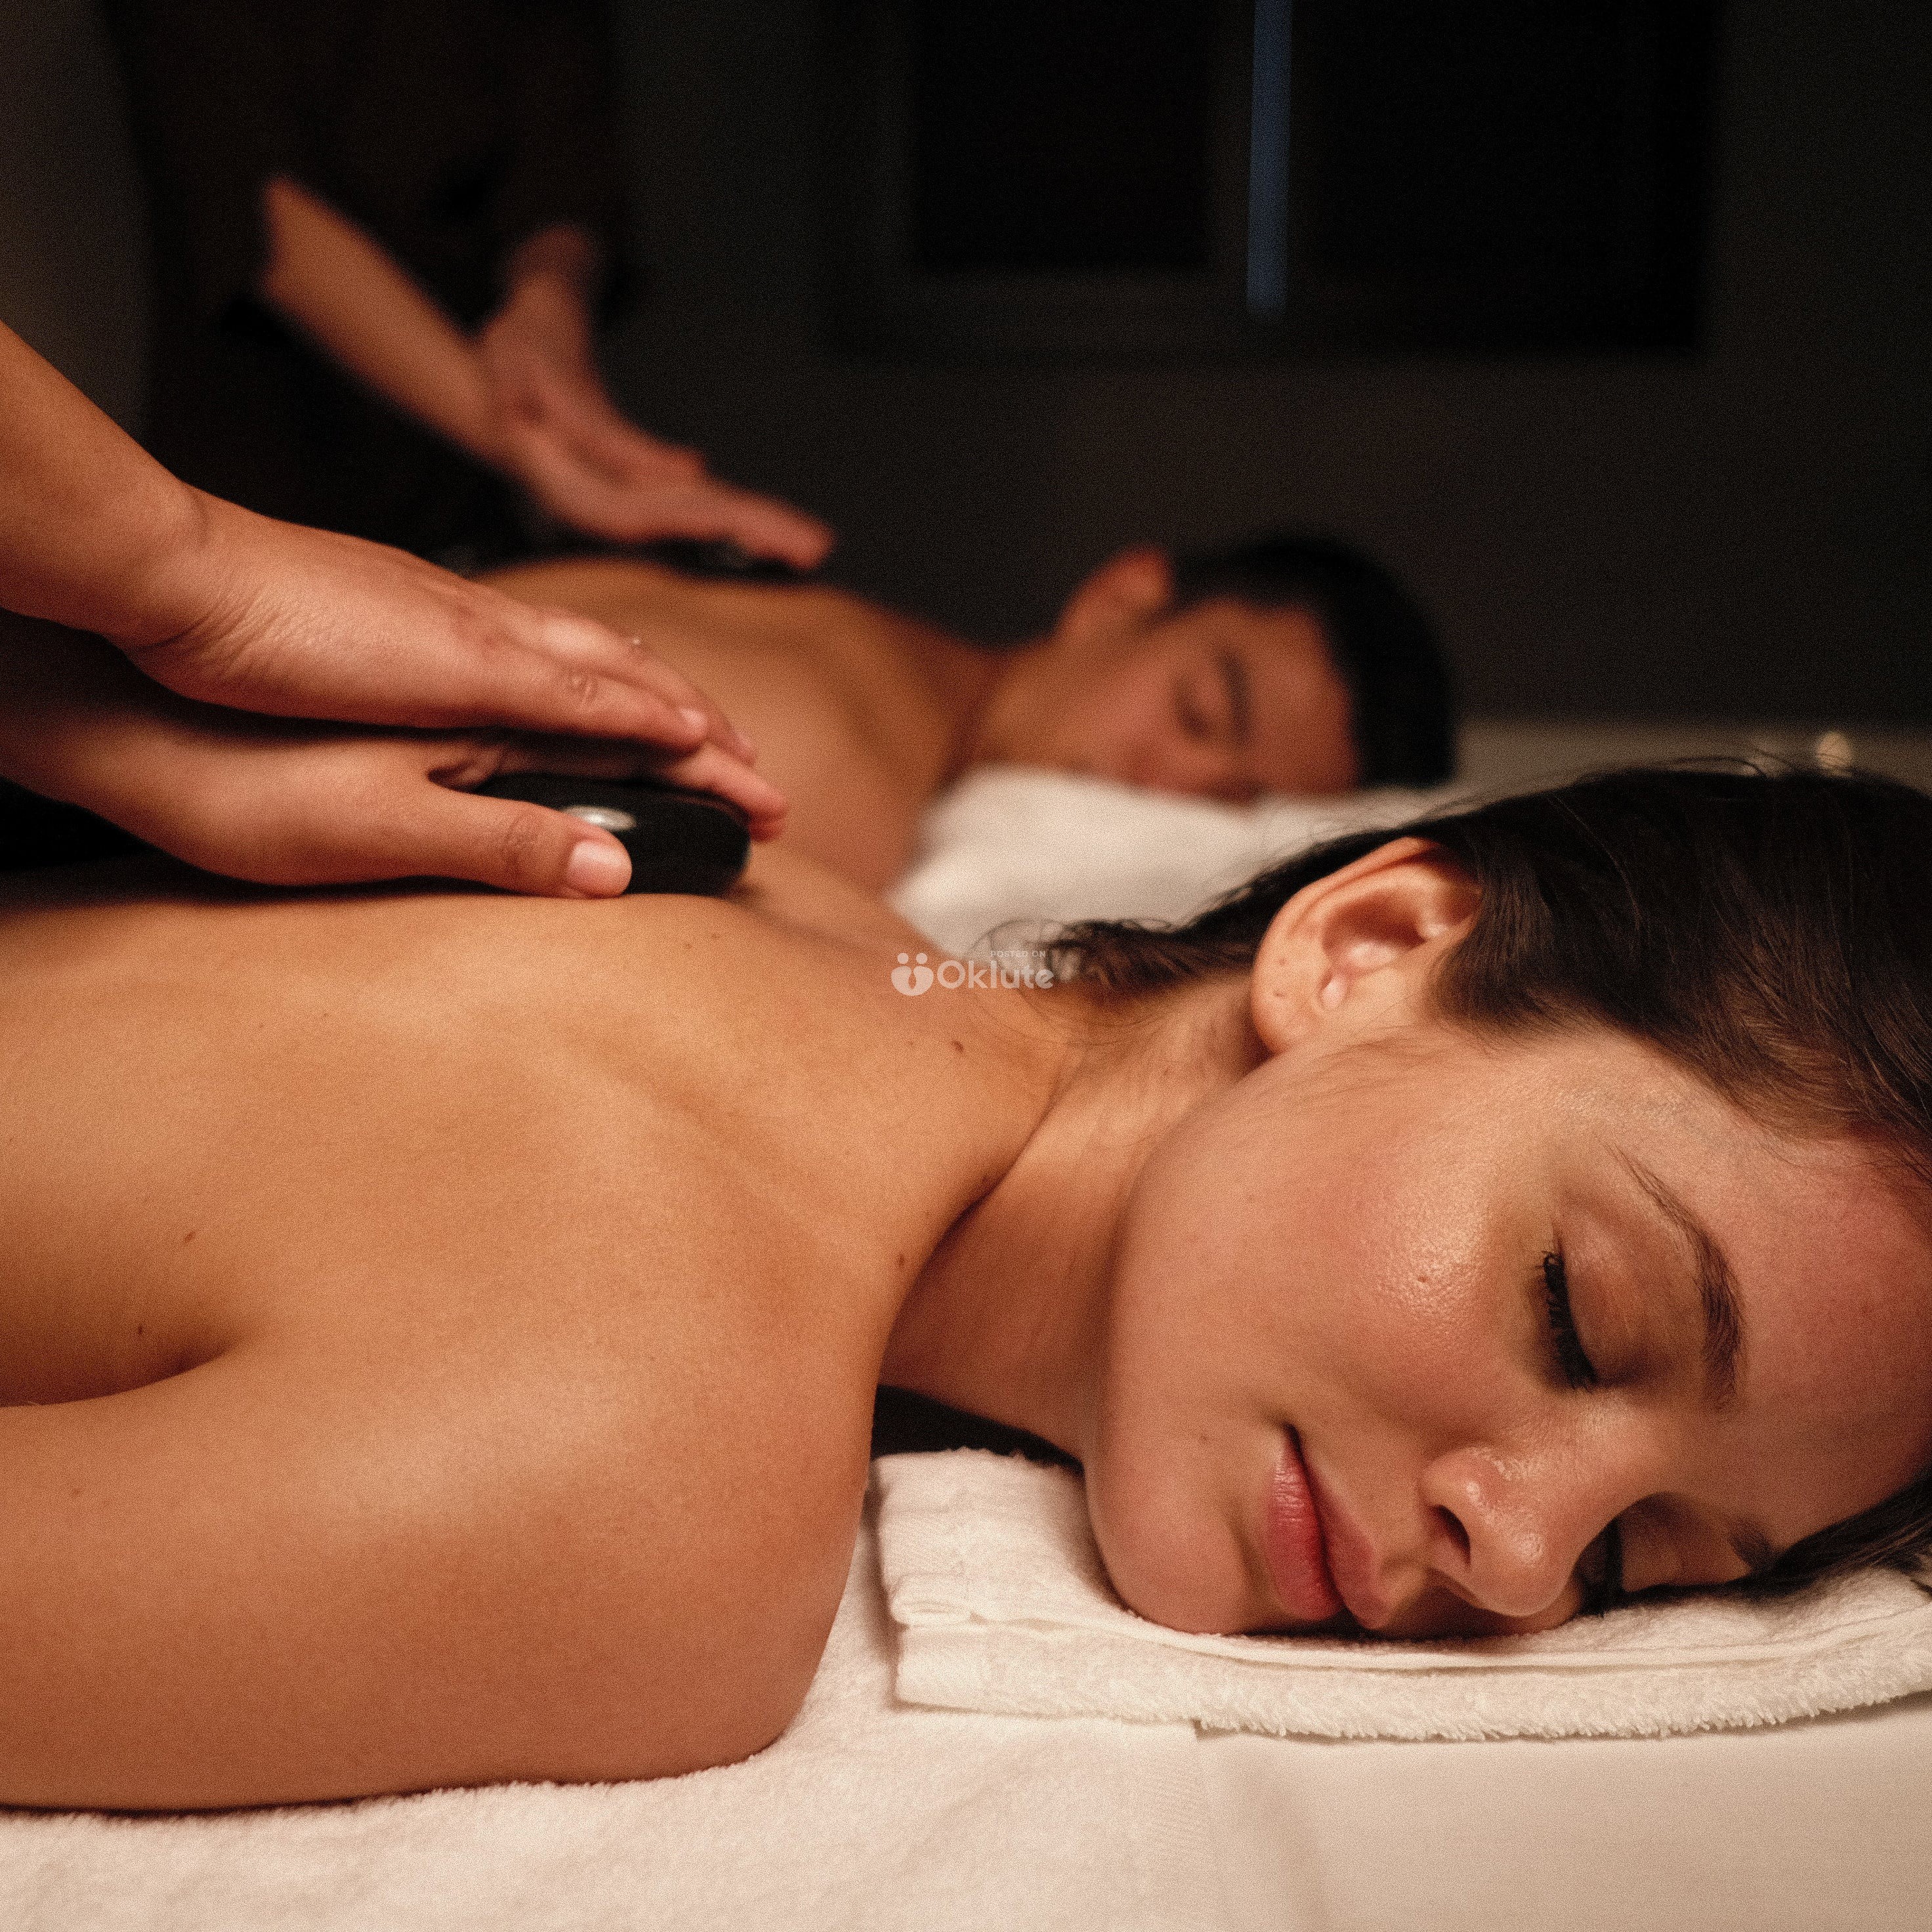 Massage for Female Full Body Relaxation through Male Therapist at HomeHotel